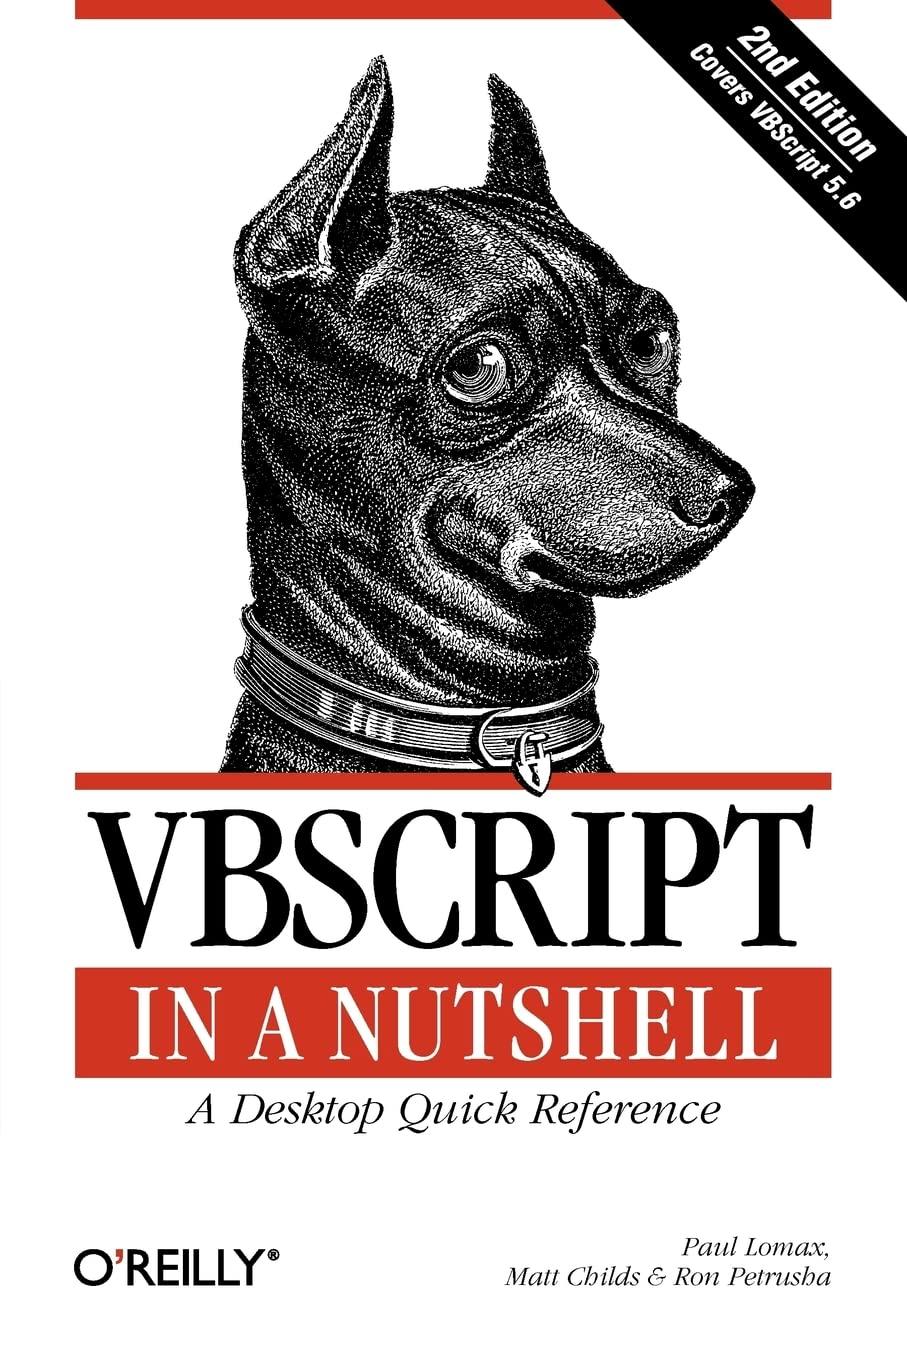 vbscript in a nutshell 2nd edition paul lomax, matt childs, ron petrusha 0596004885, 978-0596004880